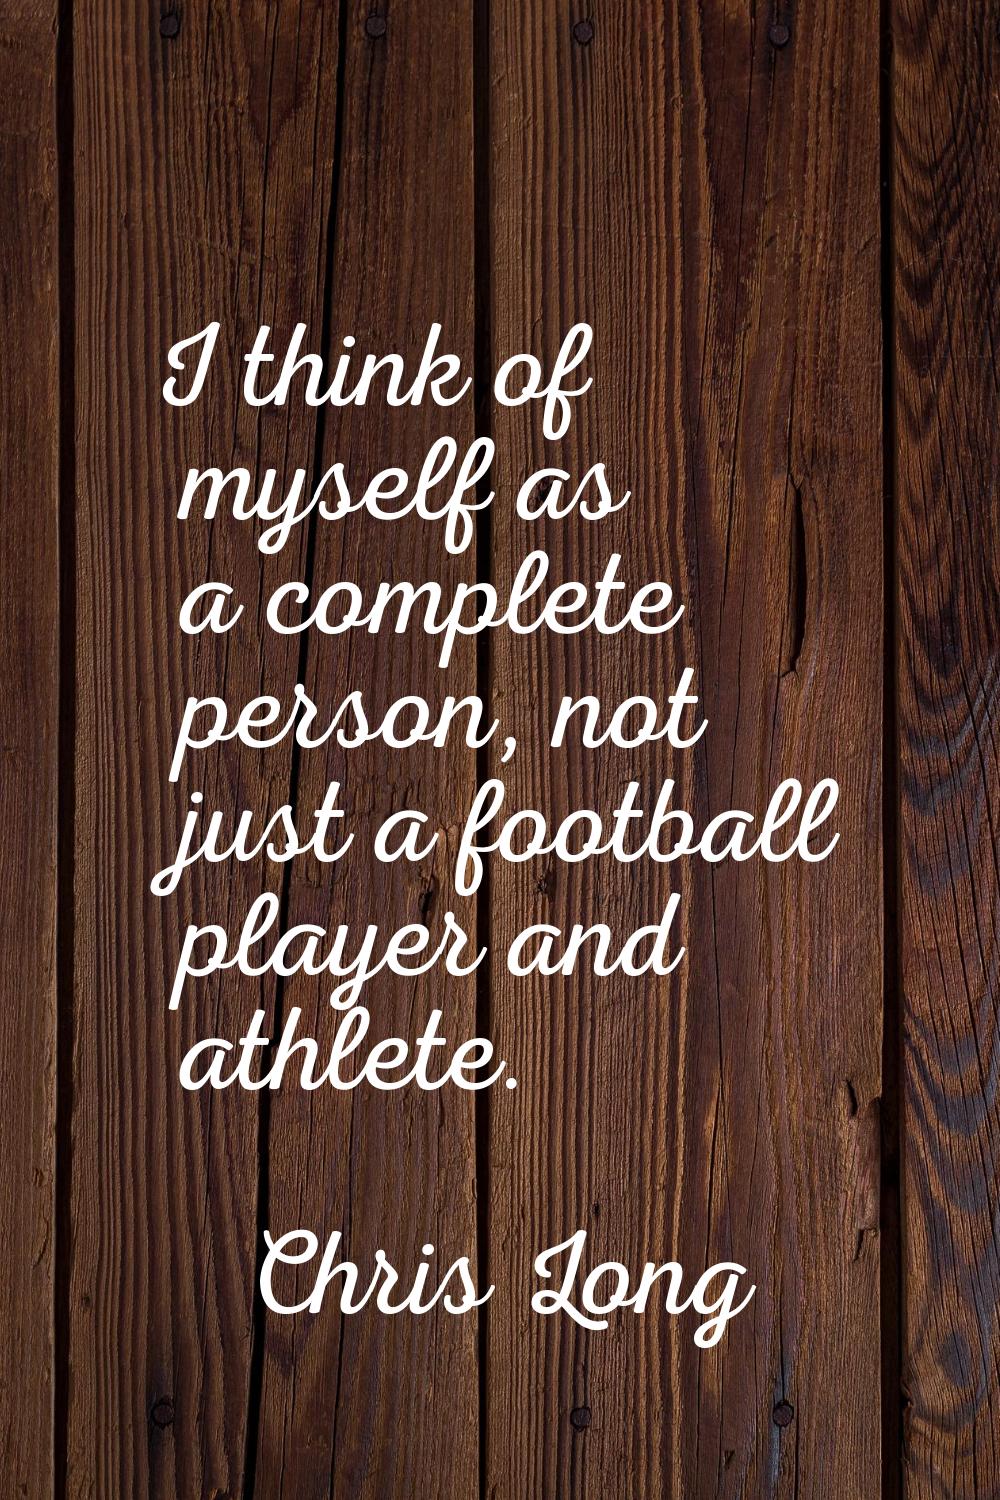 I think of myself as a complete person, not just a football player and athlete.